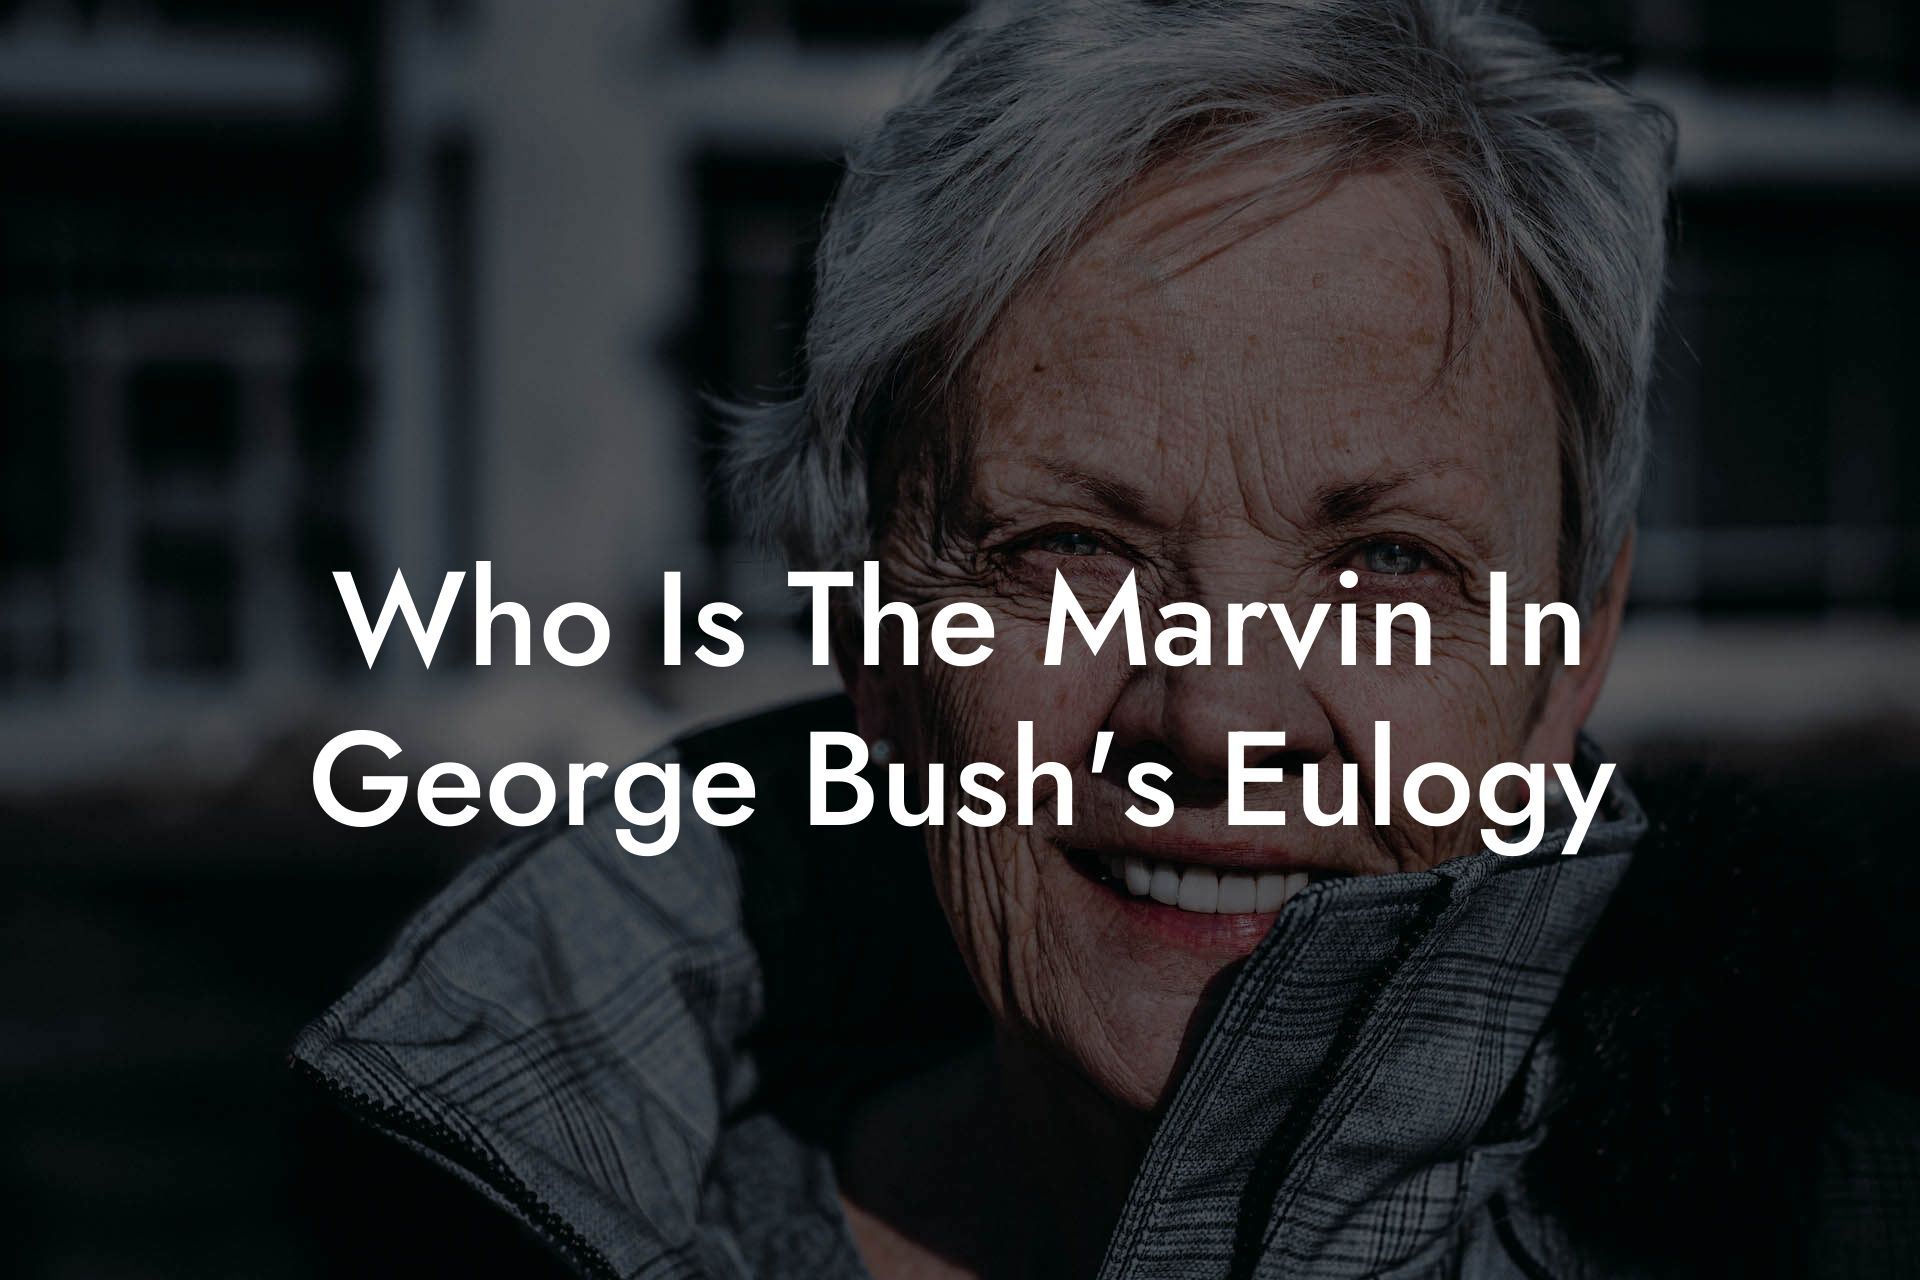 Who Is The Marvin In George Bush's Eulogy